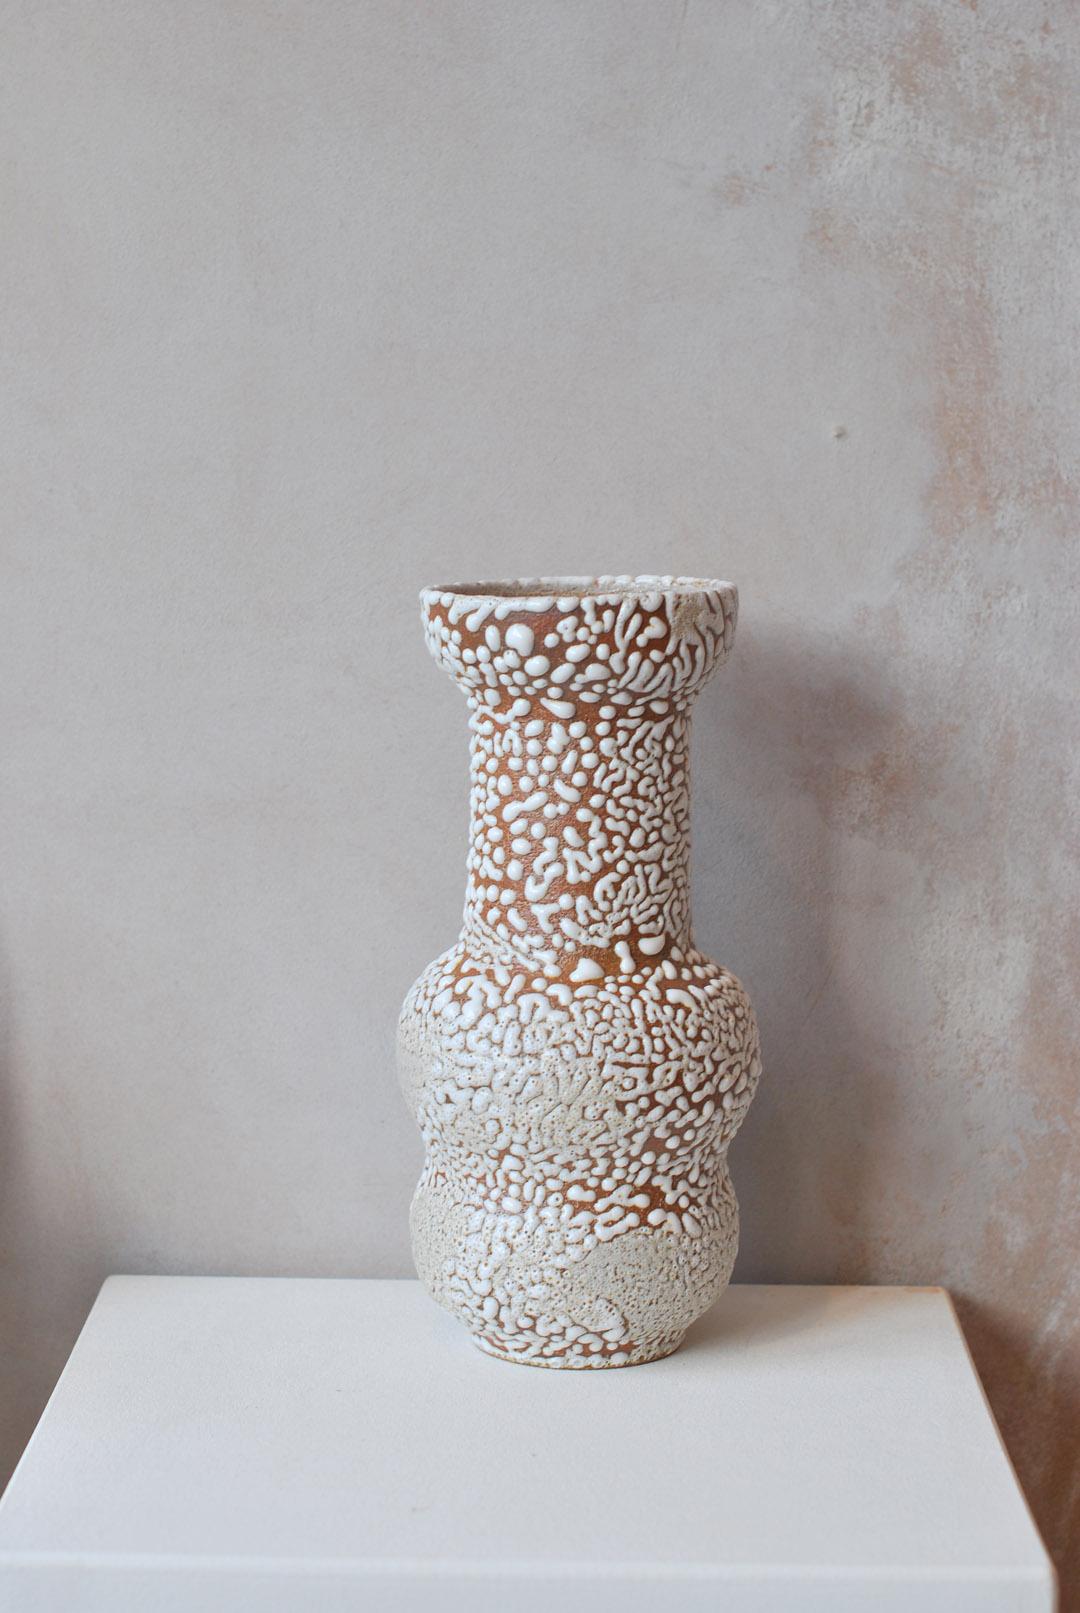 C-018 white stoneware vase by Moïo Studio
Dimensions: D12 x W12 x H25 cm
Materials: White crawl glaze on tan stoneware
Made by hand on the wheel
Unique piece, consult for multiples

Is the Berlin-based ceramic art studio of French-Palestinian